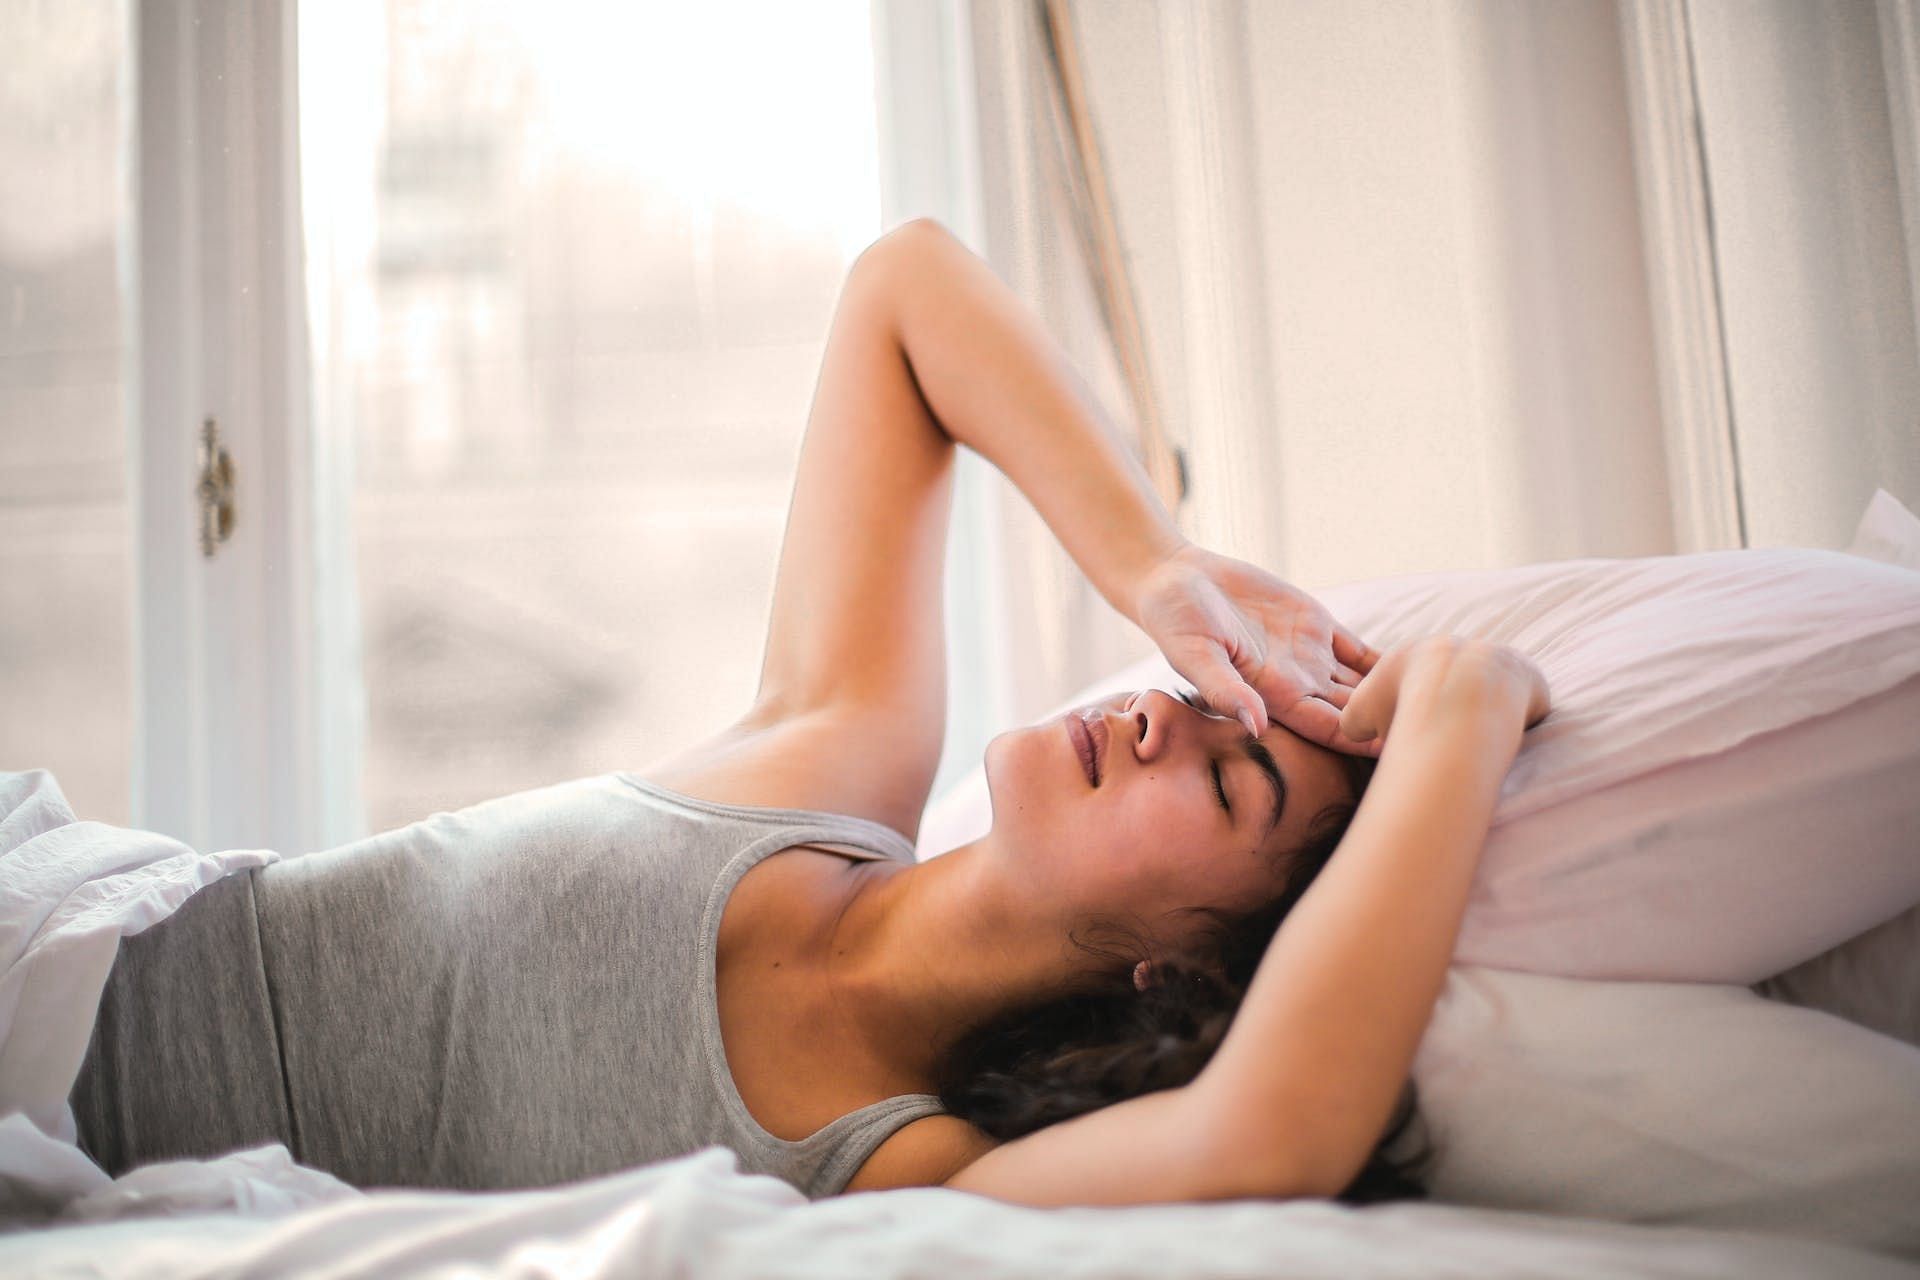 Morning hypoglycemia can lead to symptoms like tremors and shakiness. (Image via Pexels/Andrea Piacquadio)